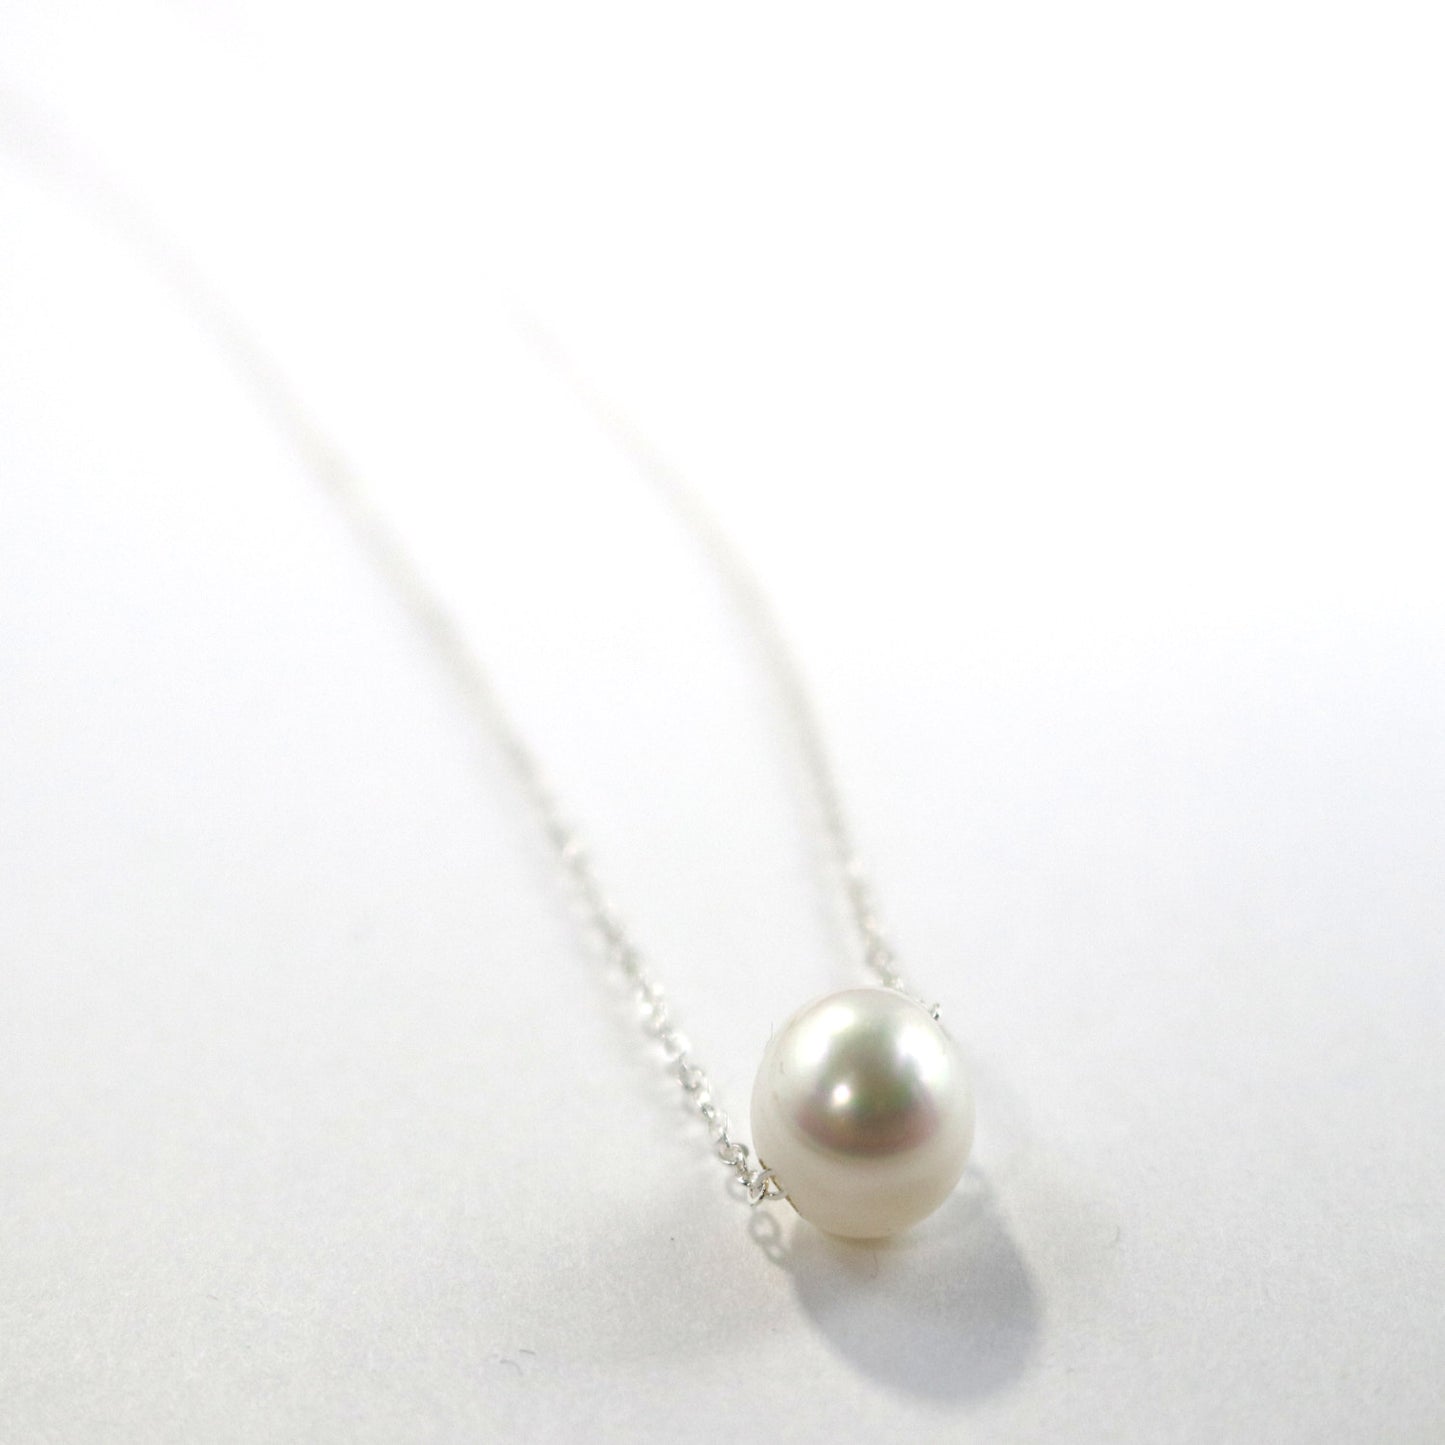 Fresh Water Pearl Necklace-Womens-LittleGreenRoomJewelry-LittleGreenRoomJewelry